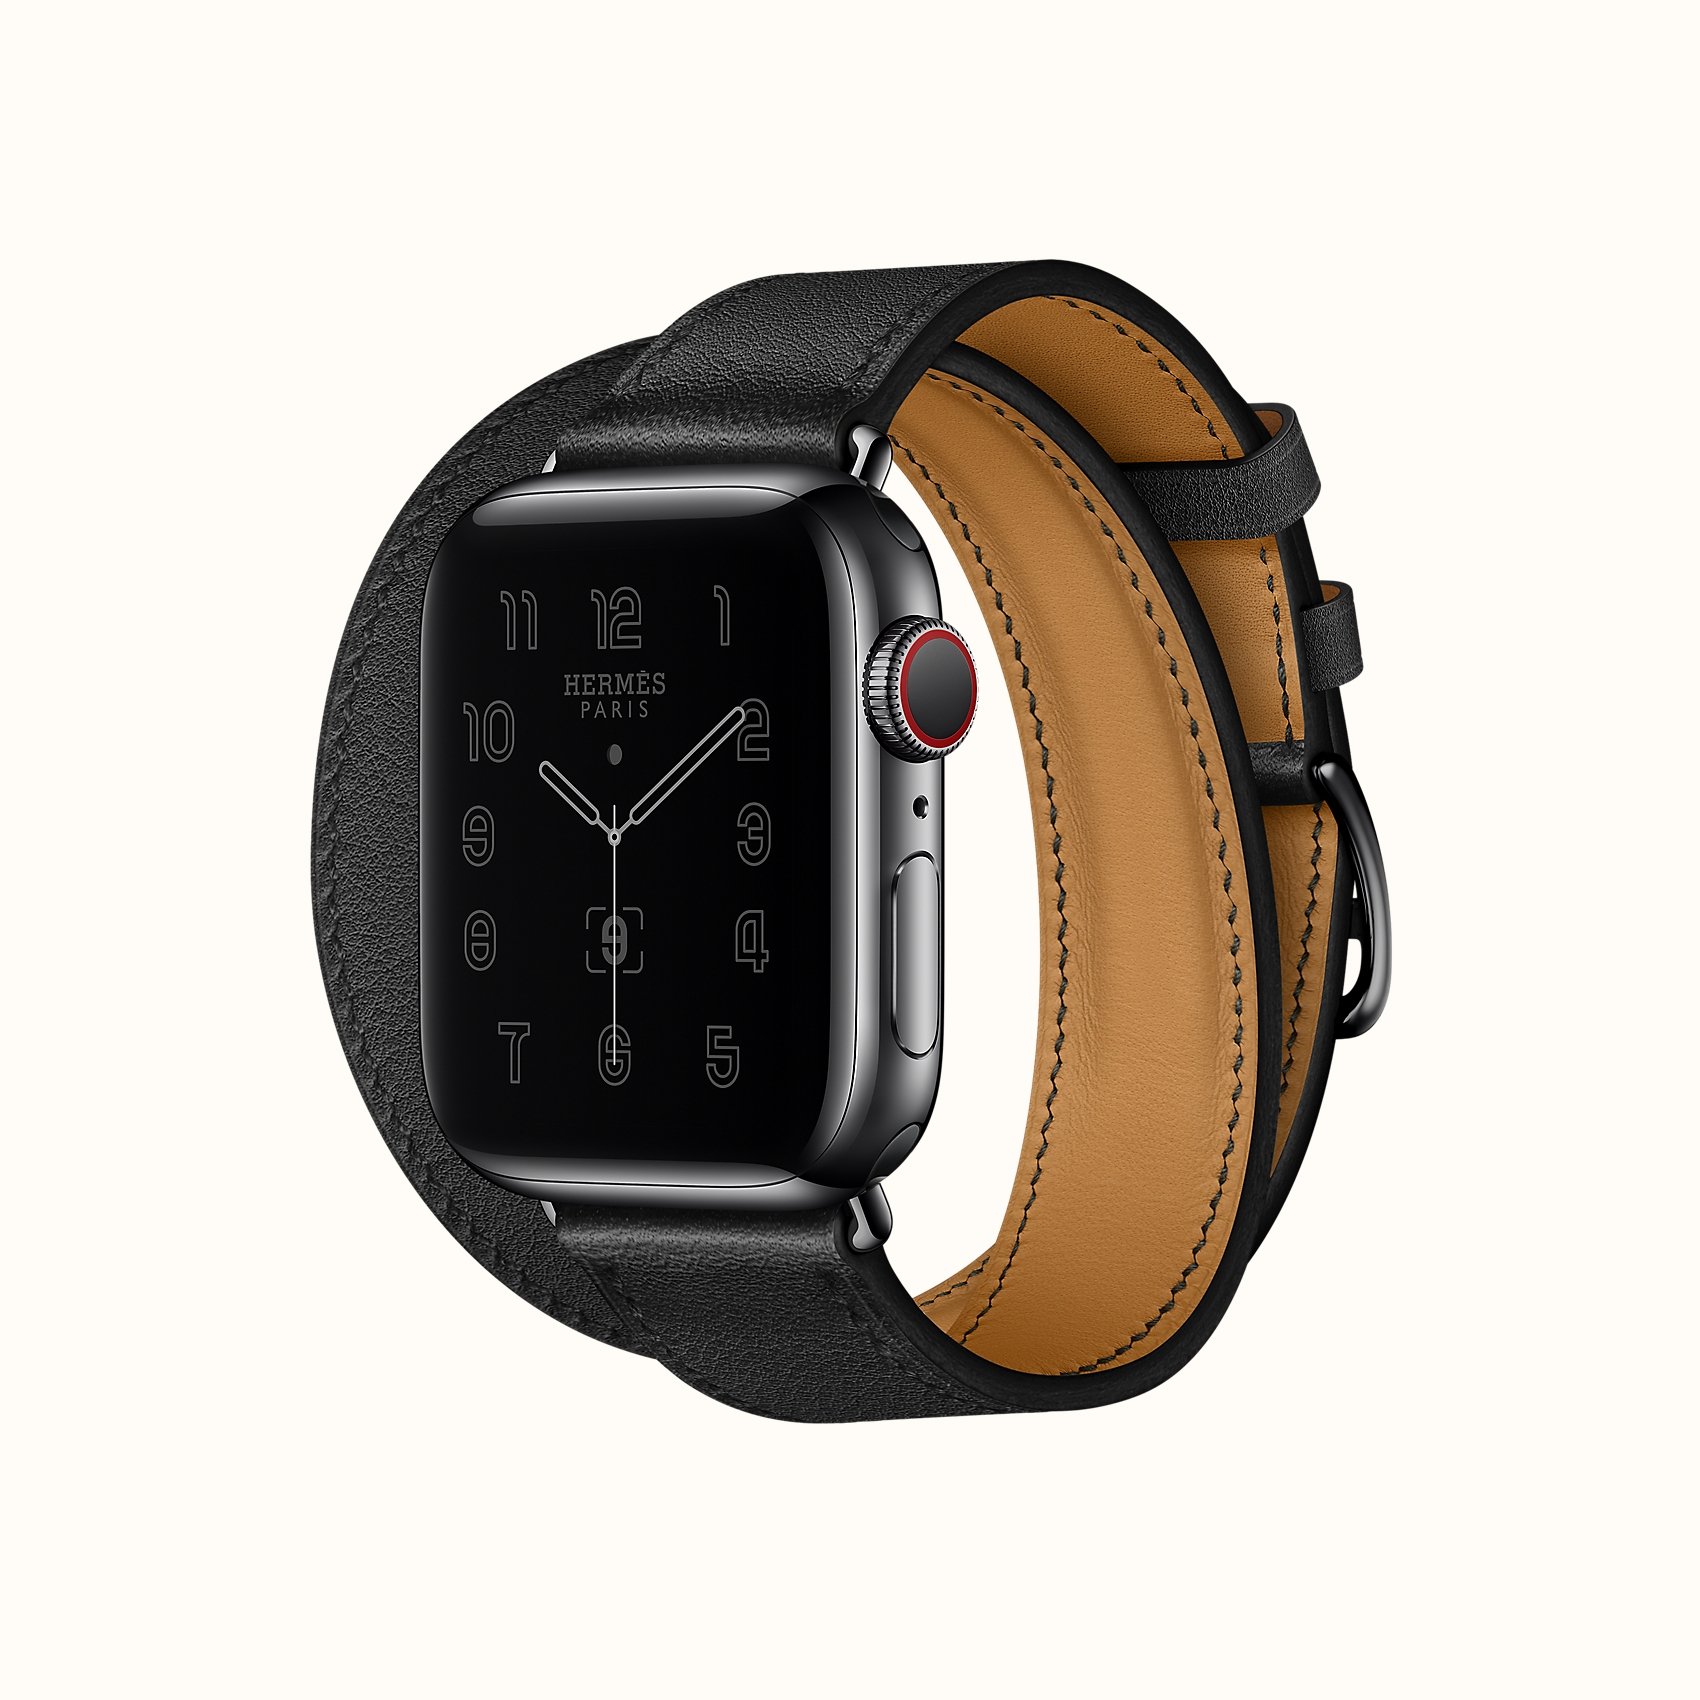 Space Black Series 6 case & Band Apple Watch Hermes Double Tour 40 mm